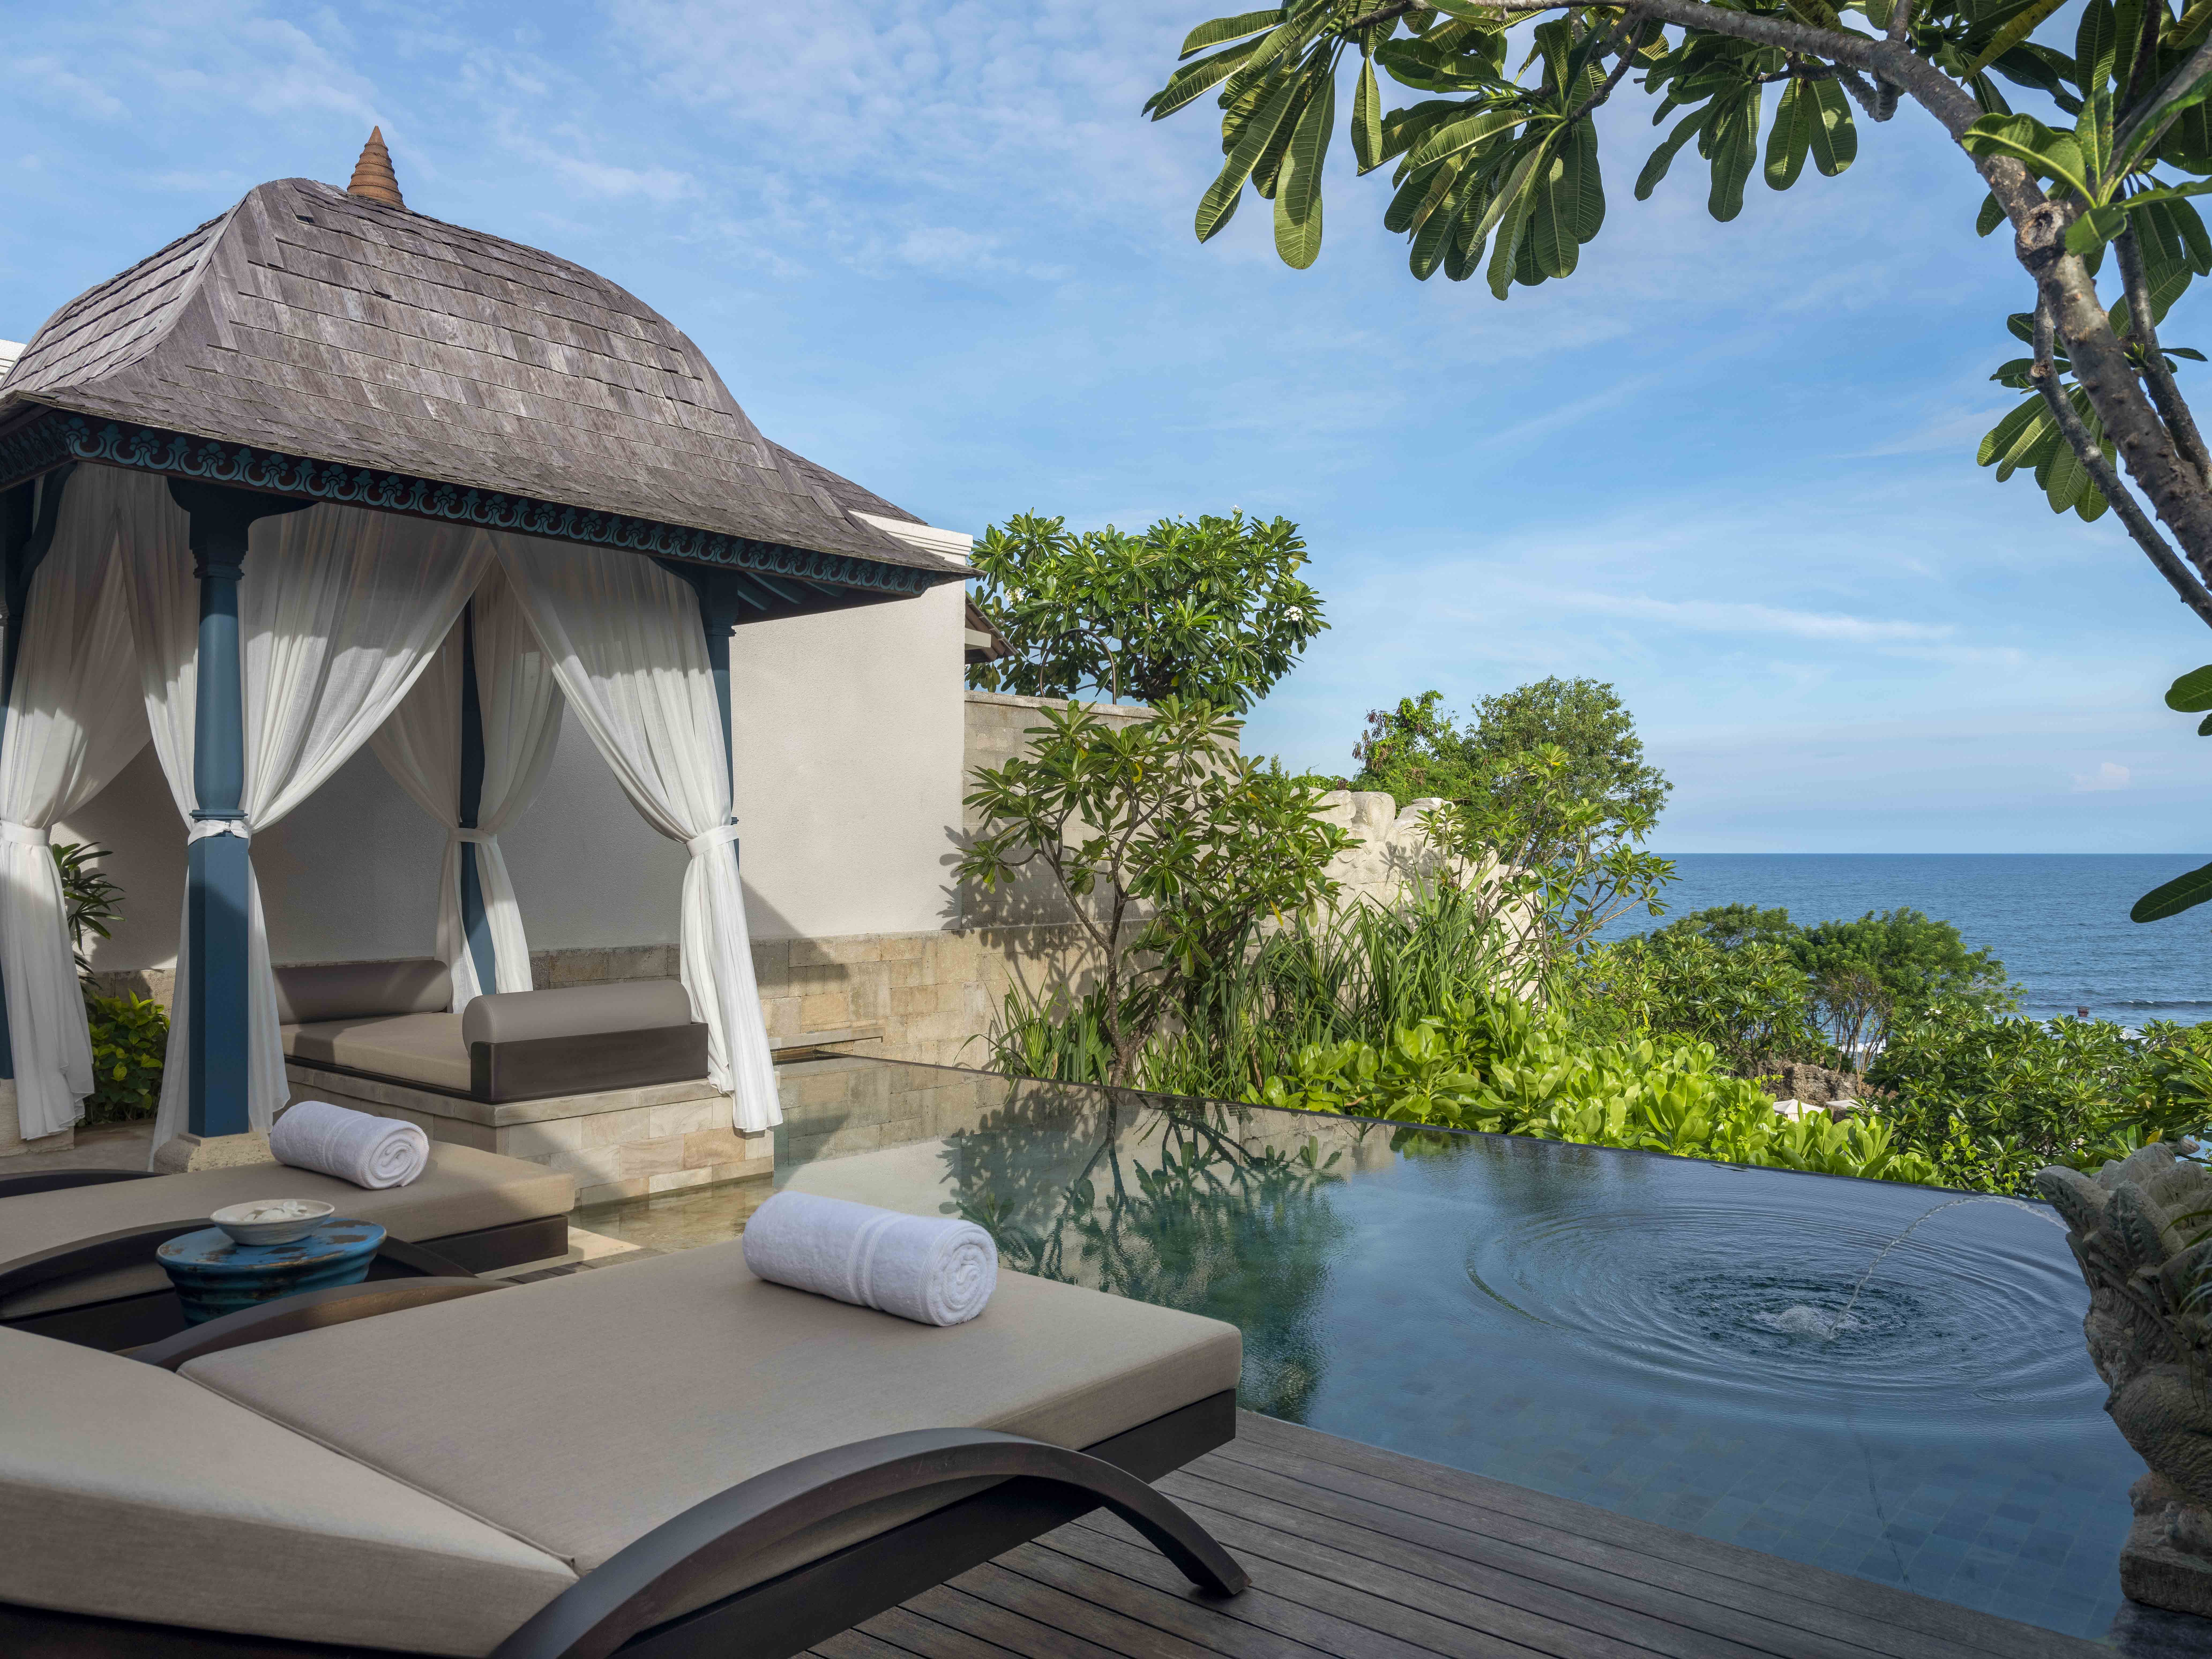 Jumeirah Bali The Perfect Escape Weekend Staycation Deal